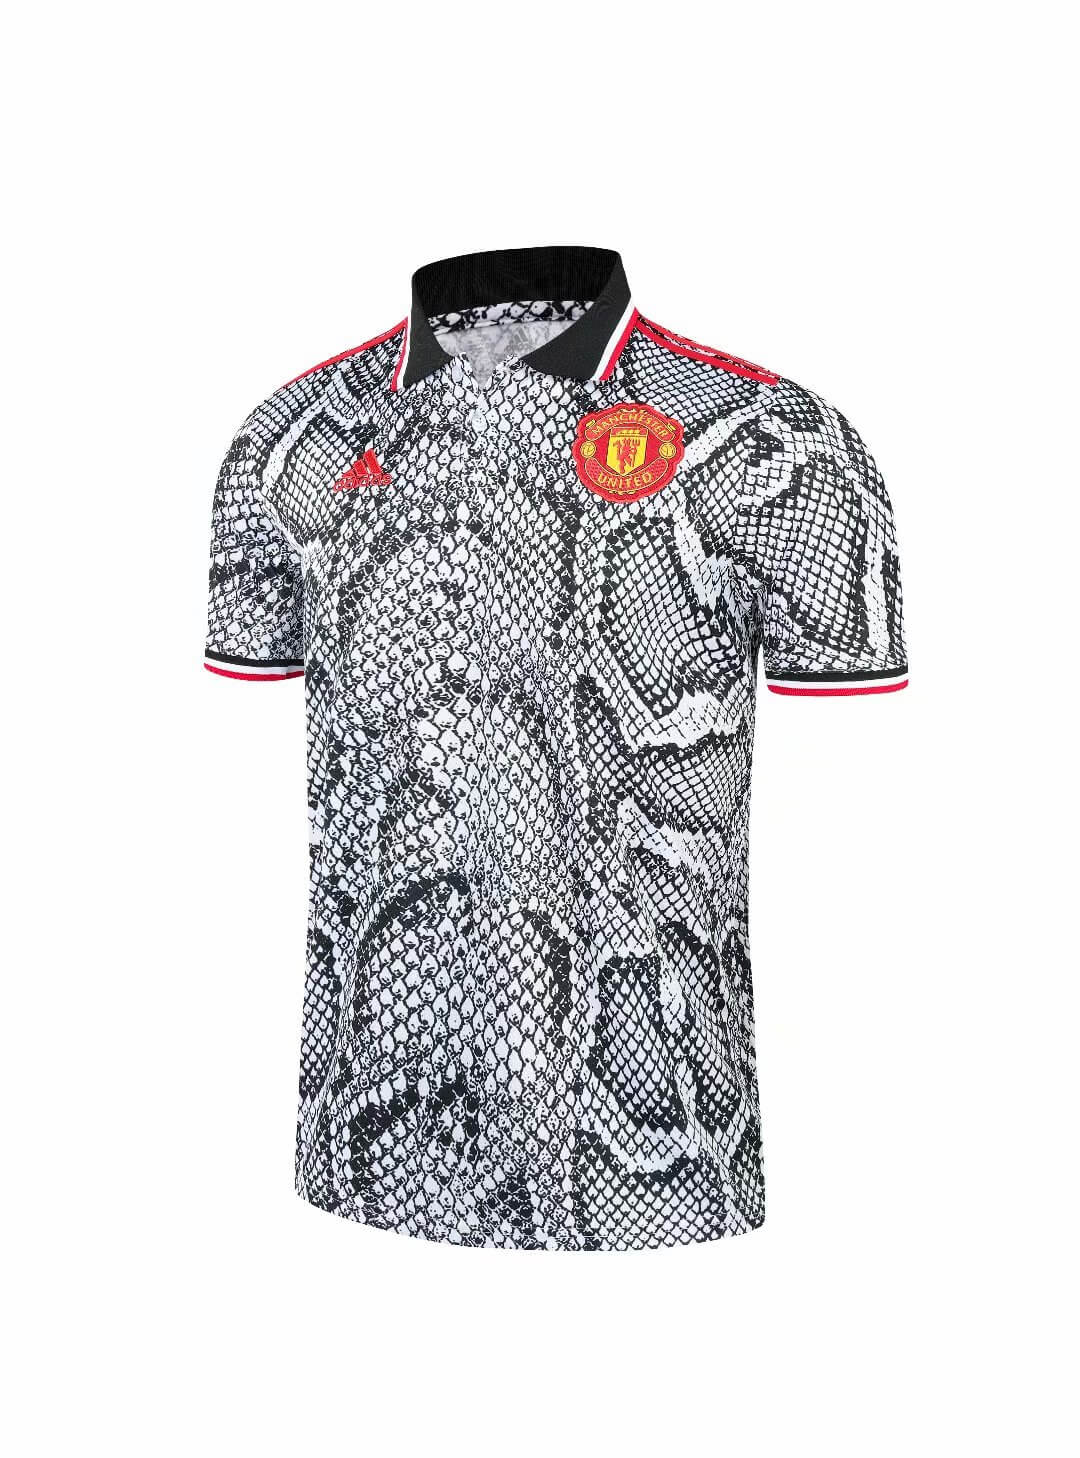 Manchester United Core Polo Shirt 2021/22